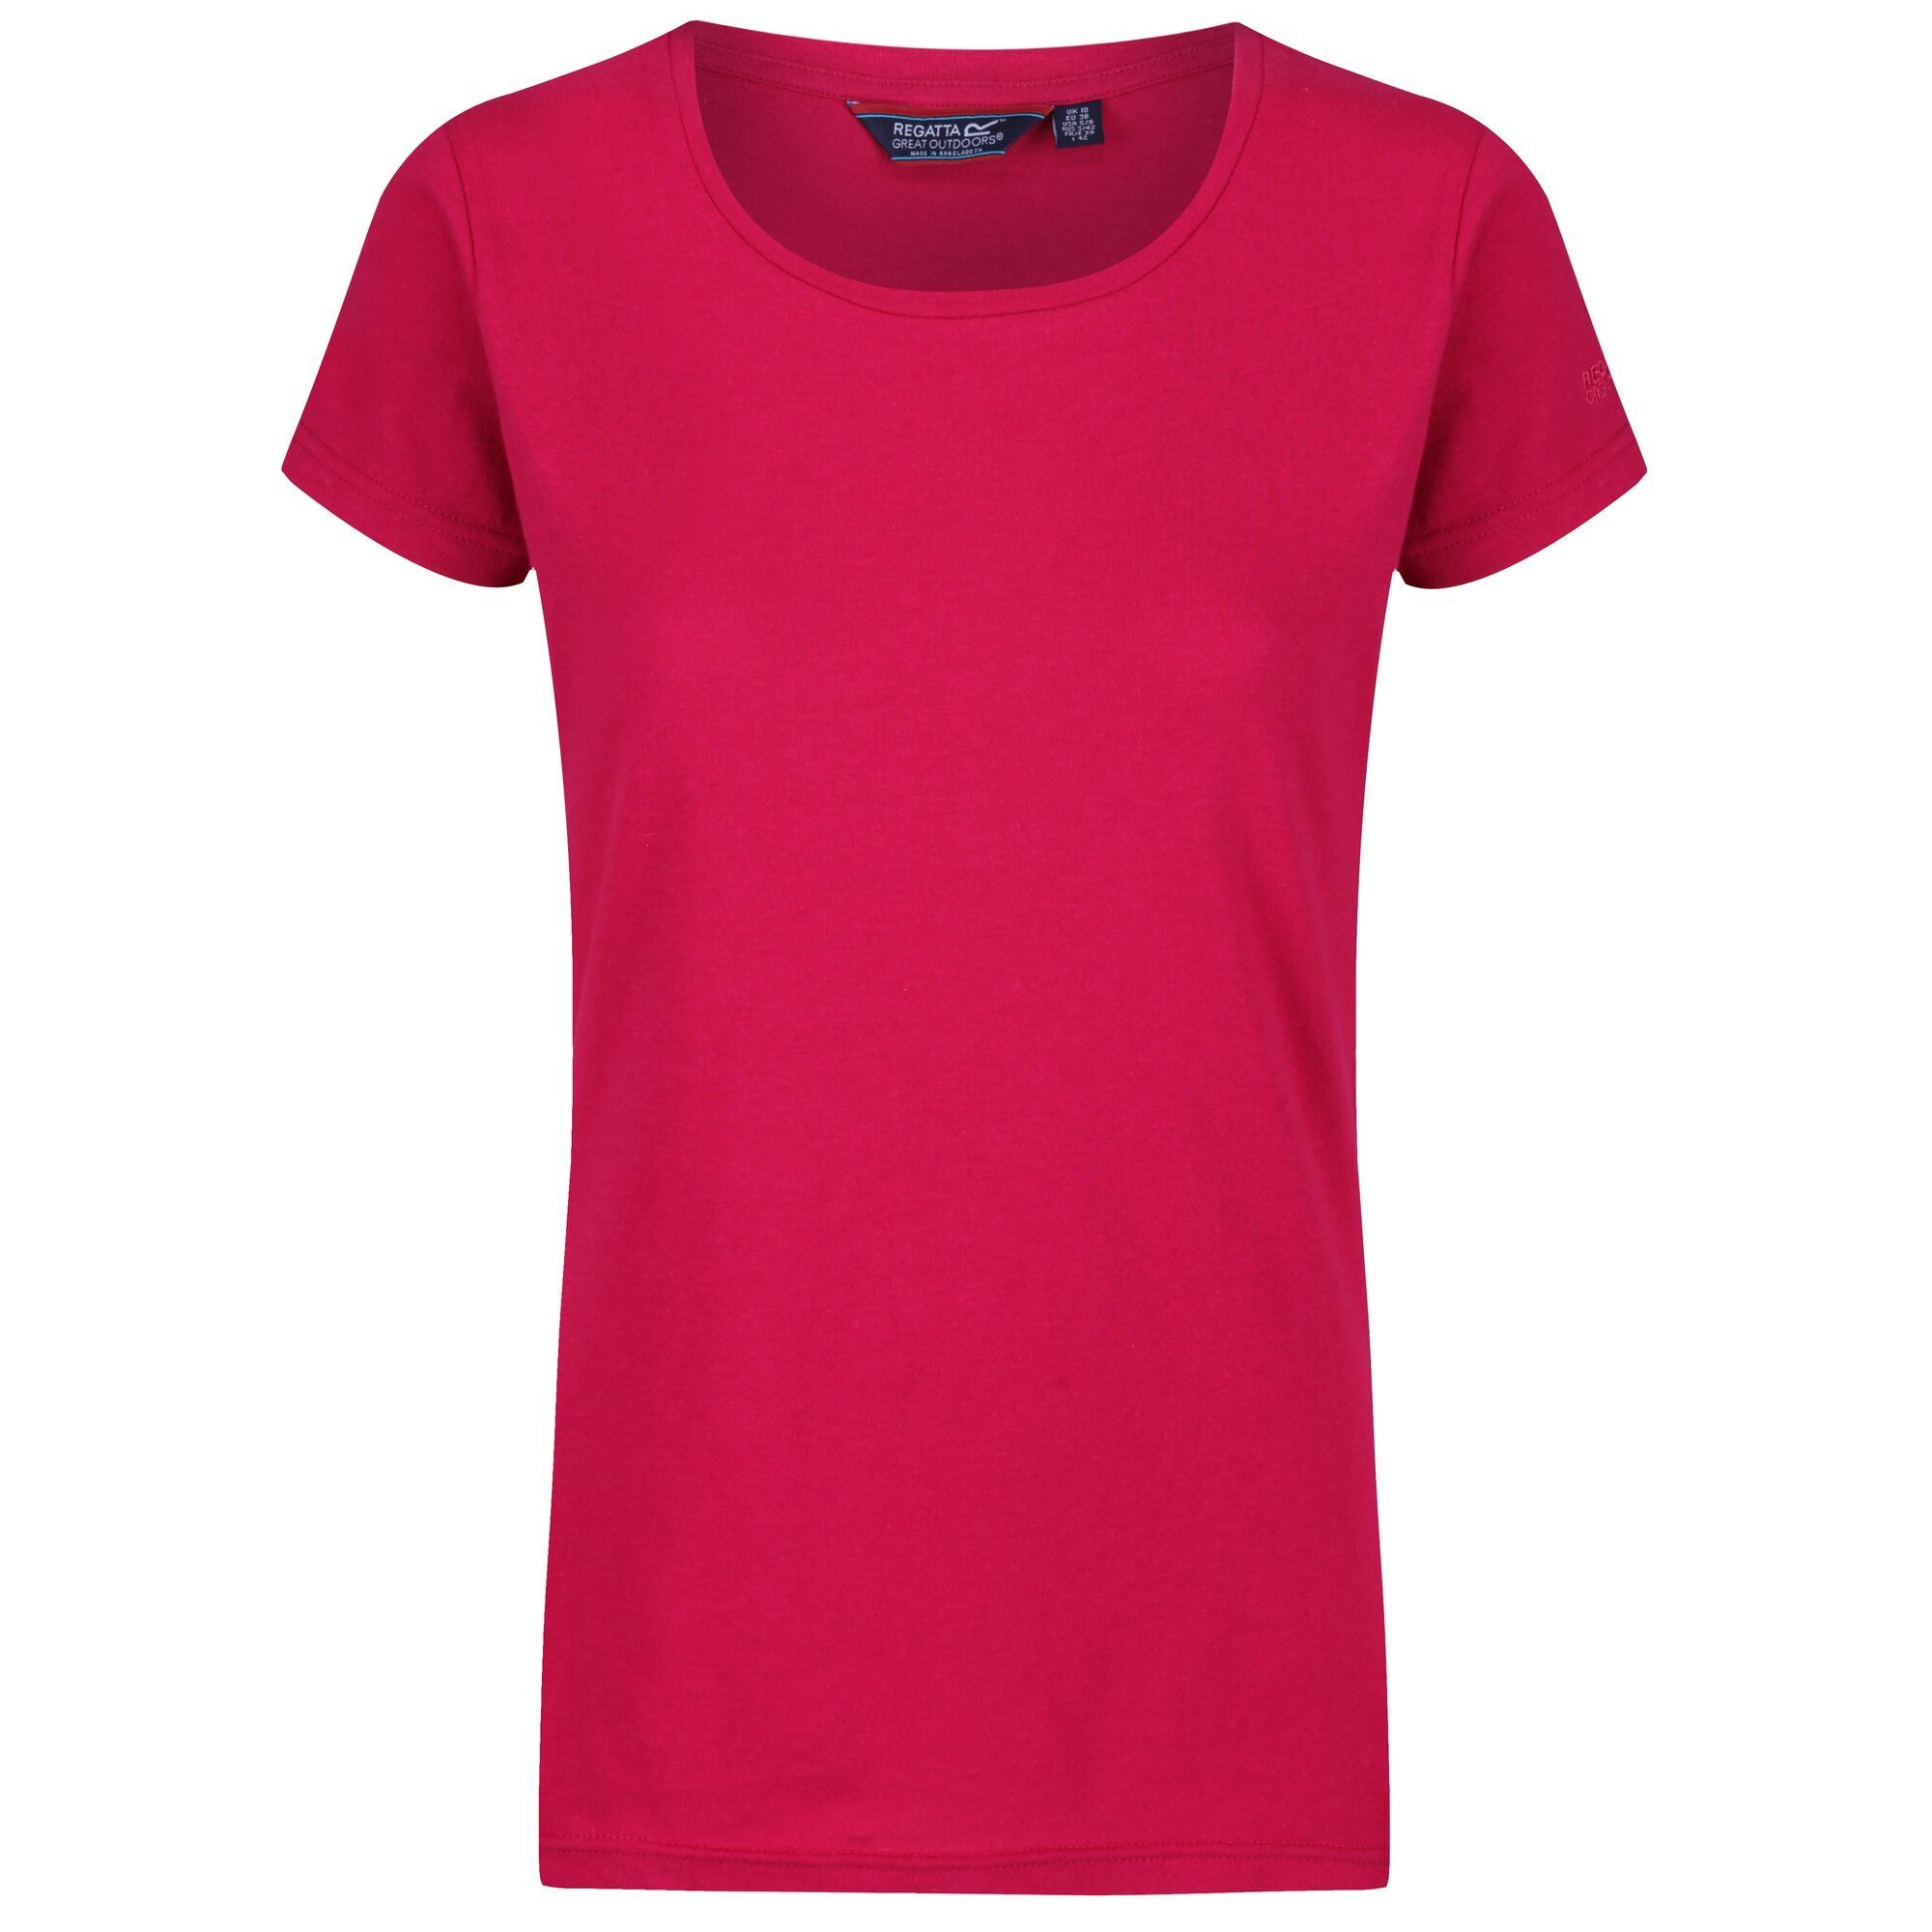 100% Cotton. Fabric: Coolweave, Jersey. 130gsm. Design: Plain. Neckline: Round Neck. Sleeve-Type: Short-Sleeved. Breathable.